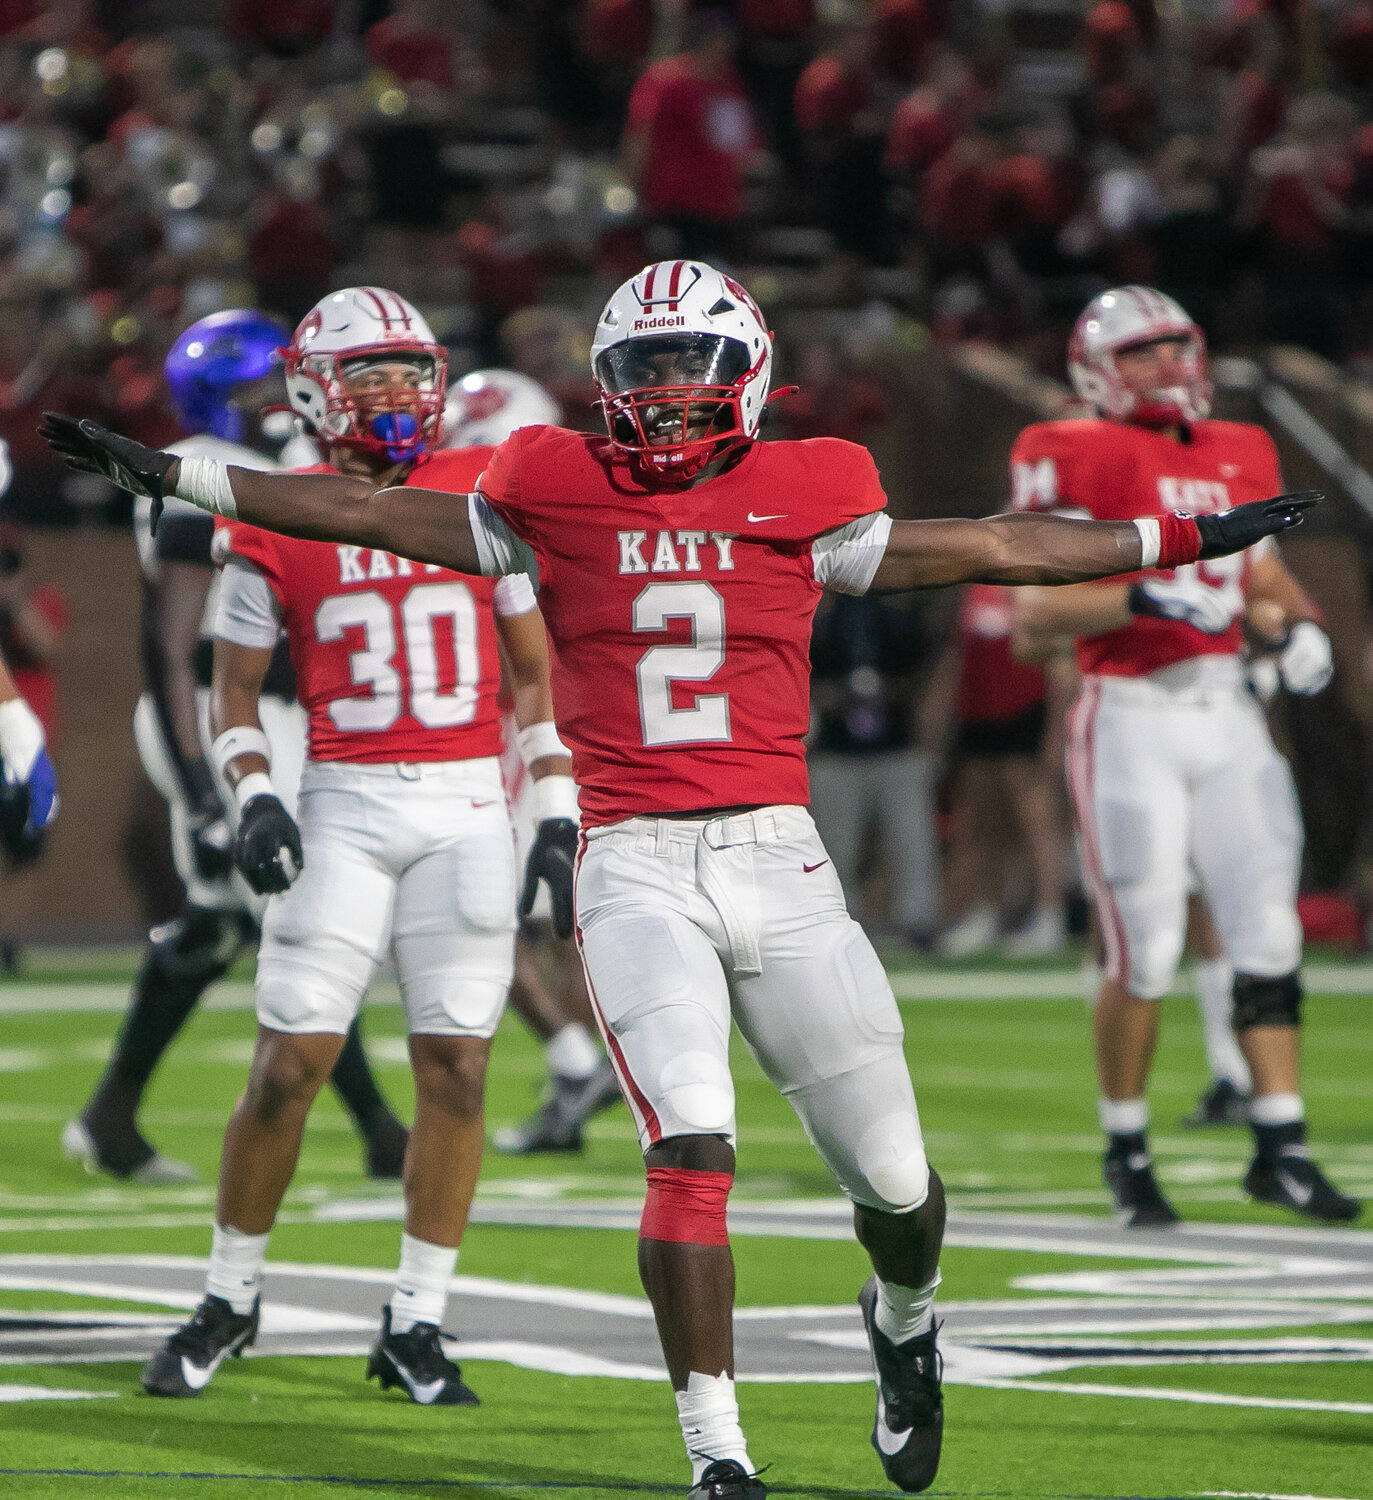 Dak Brinkley celebrates after a pass breakup during Saturday's game between Katy and Clear Springs at Rhodes Stadium.